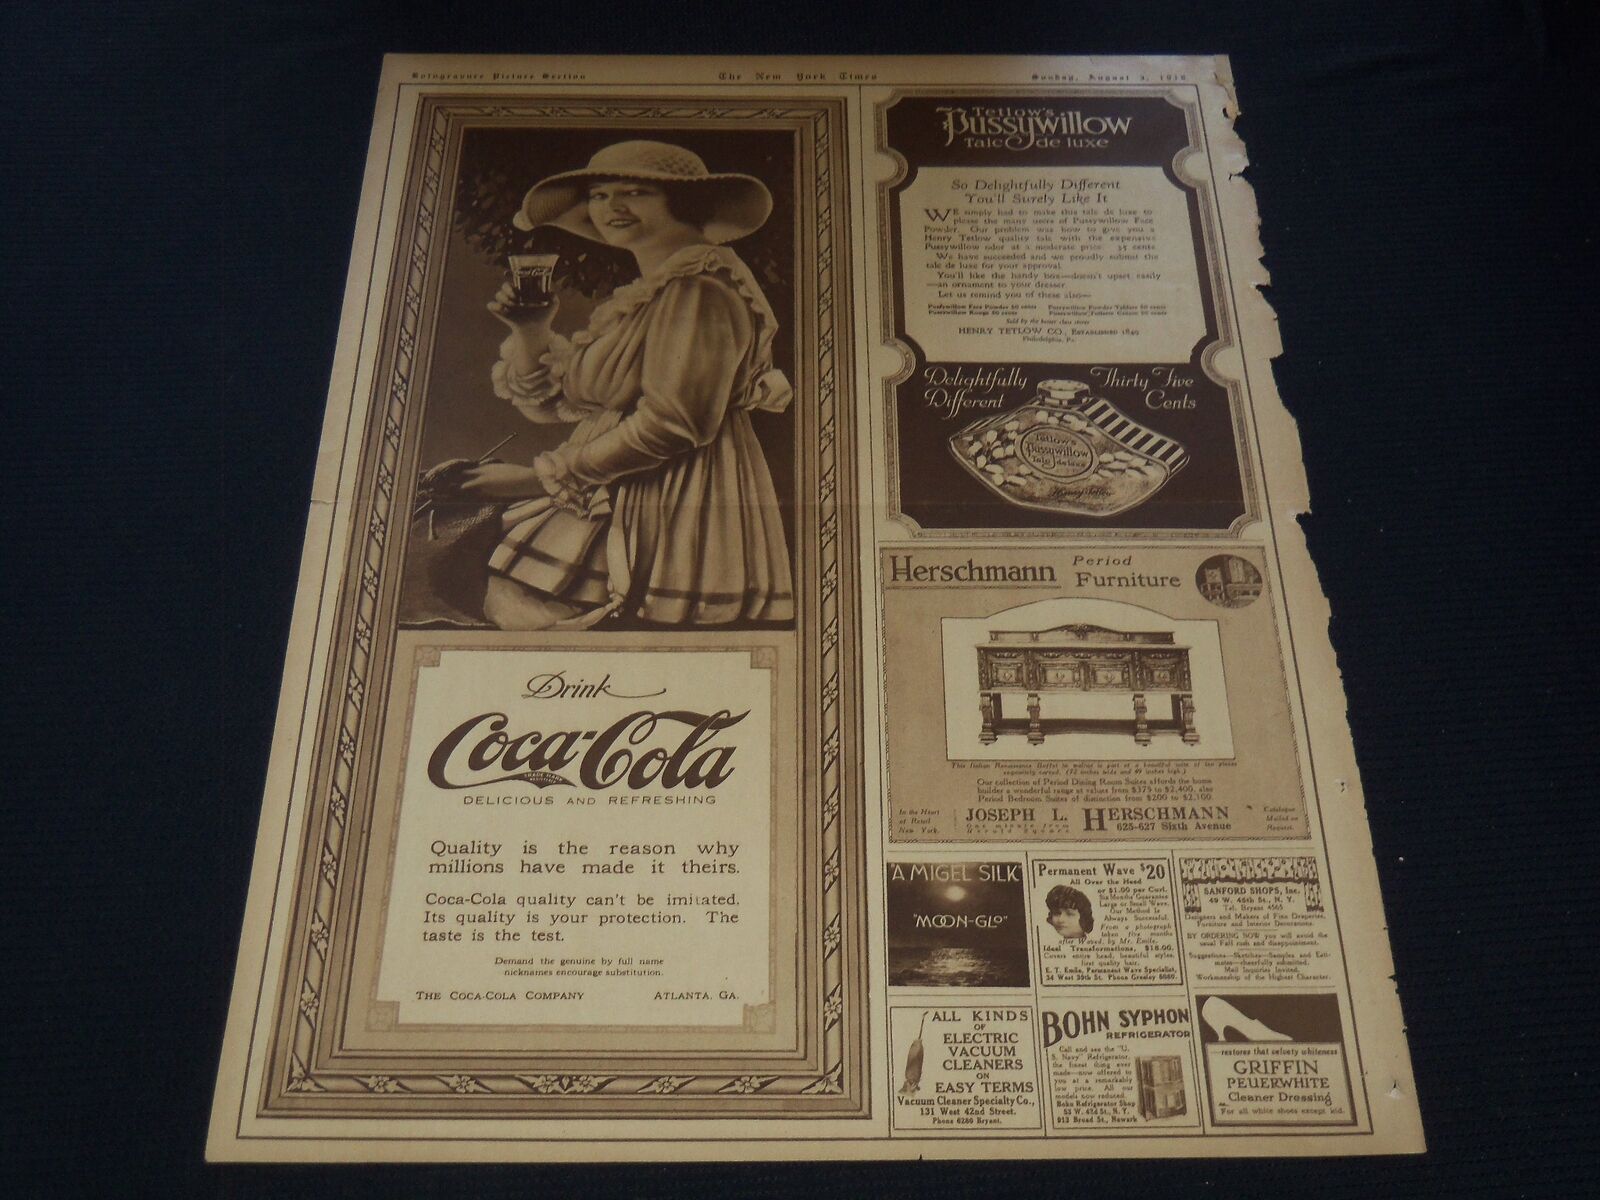 1919 AUGUST 3 NEW YORK TIMES - COCA-COLA 1/2 ADVERTISEMENT - NP 2151Q